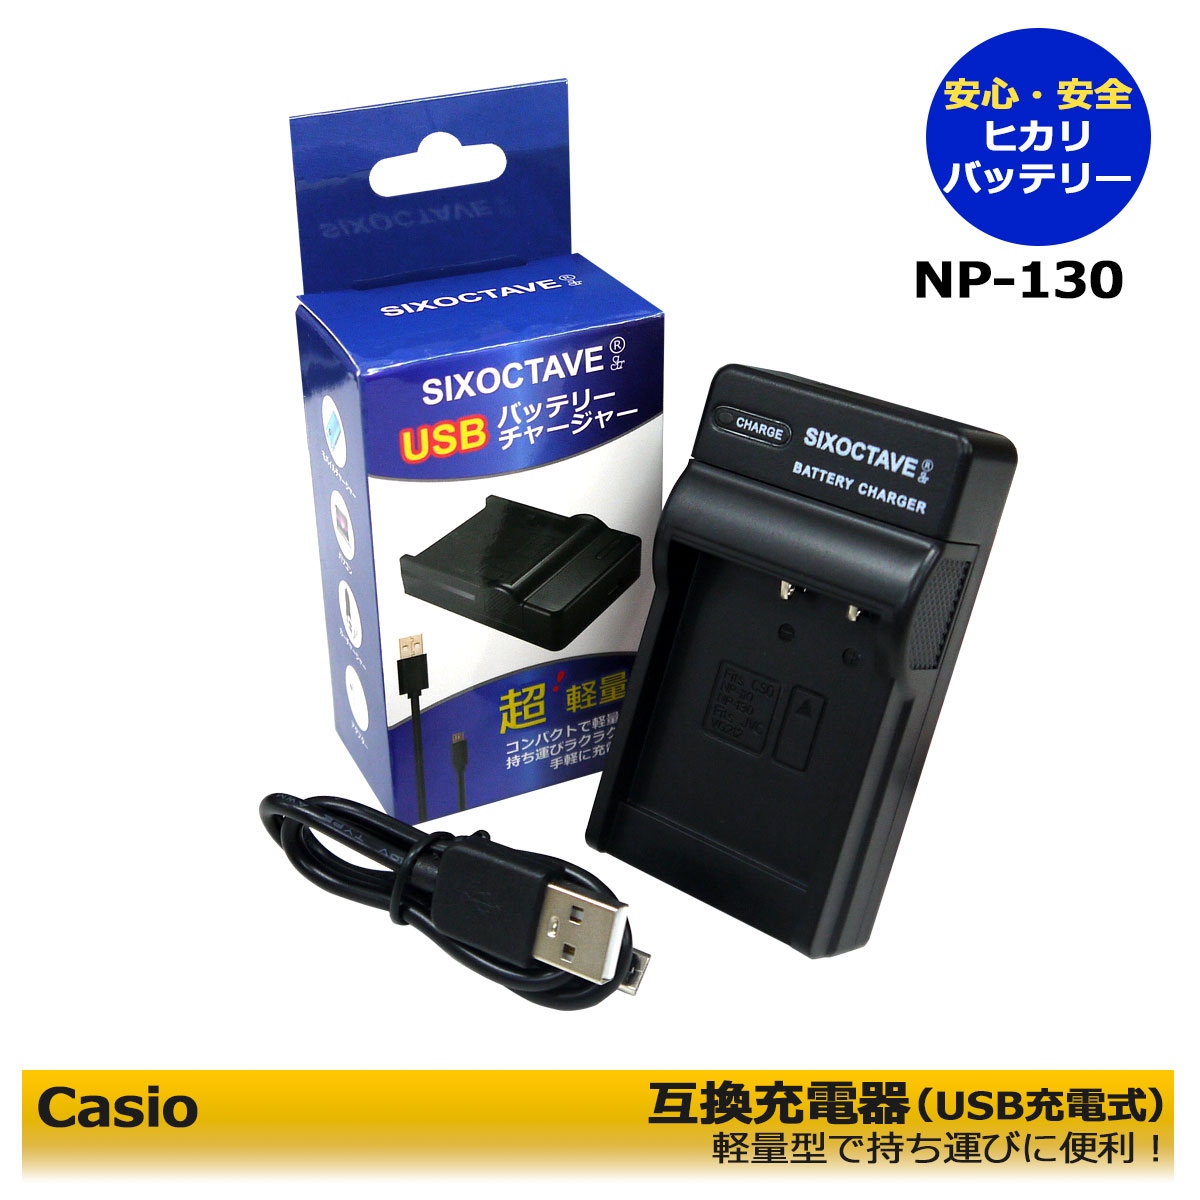 EXILIM　Casio　NP-130　NP-110　NP-160　USB